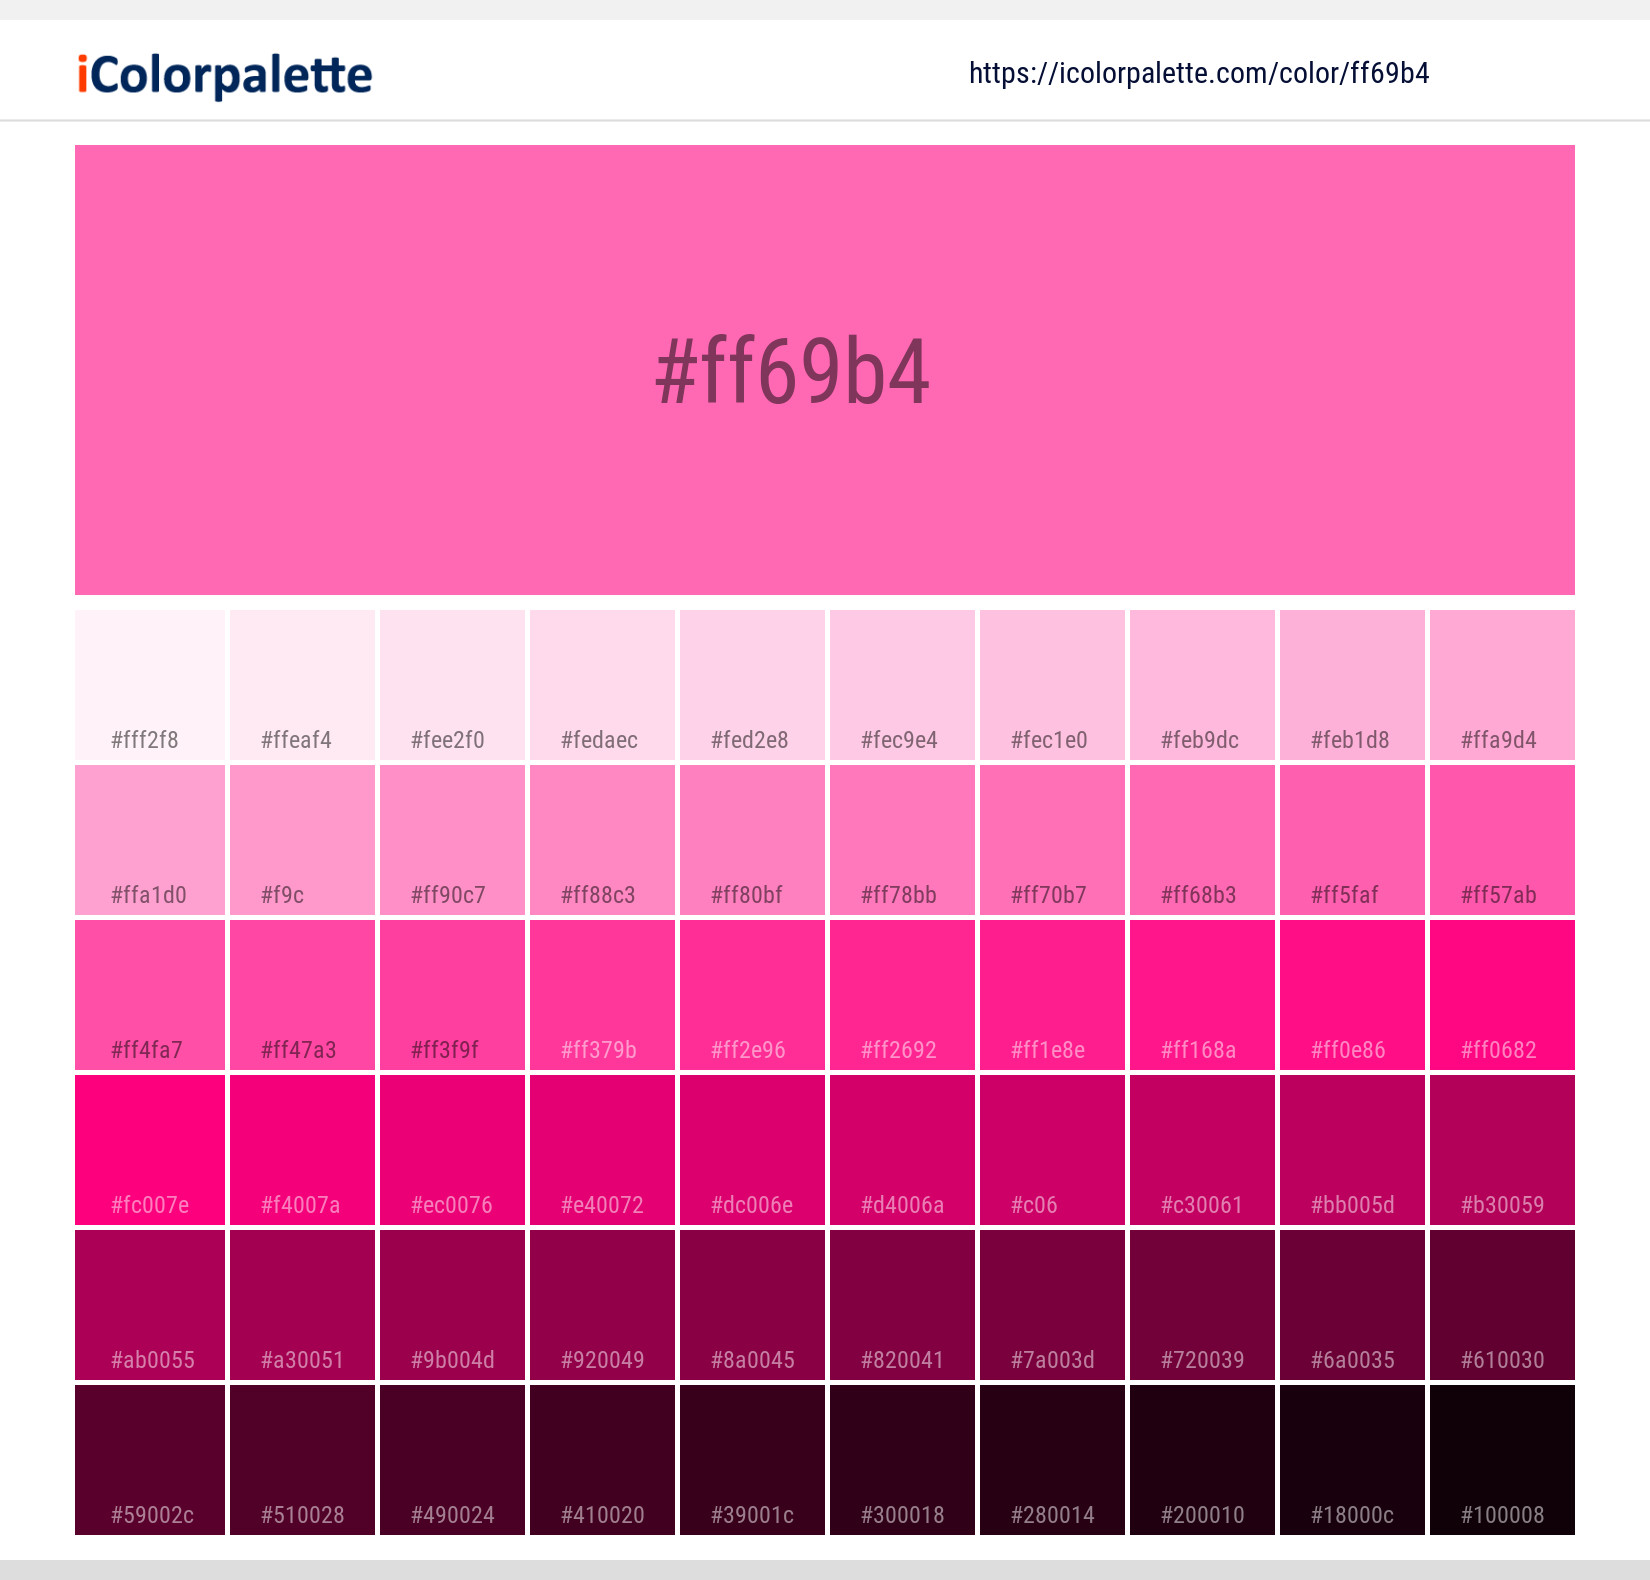 https://www.icolorpalette.com/download/shades/ff69b4_color_shades.jpg